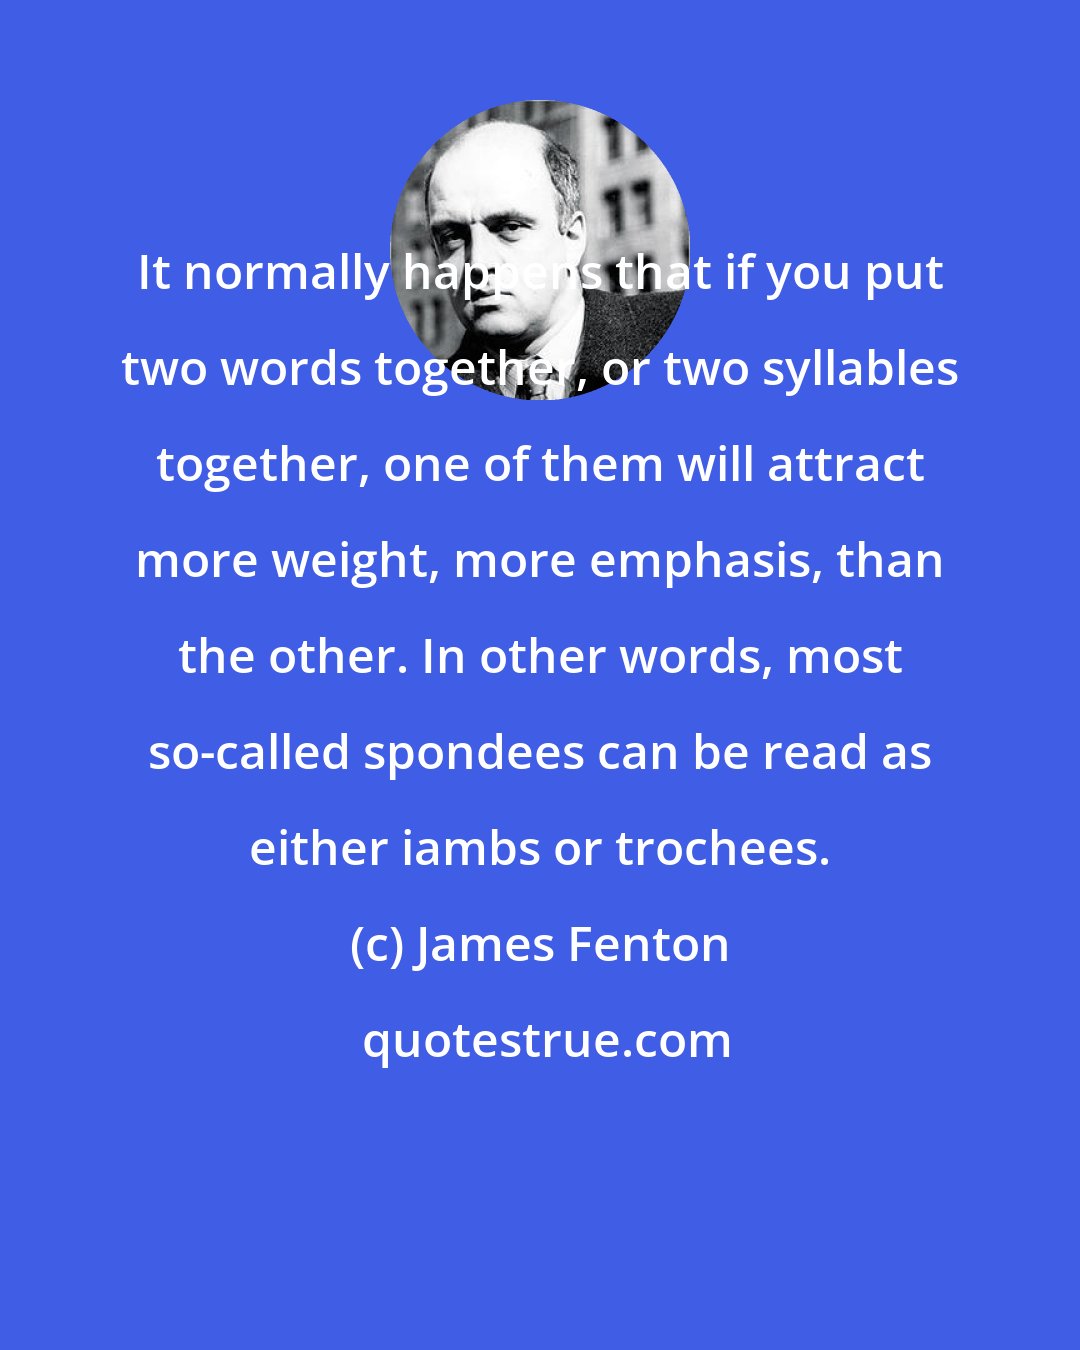 James Fenton: It normally happens that if you put two words together, or two syllables together, one of them will attract more weight, more emphasis, than the other. In other words, most so-called spondees can be read as either iambs or trochees.